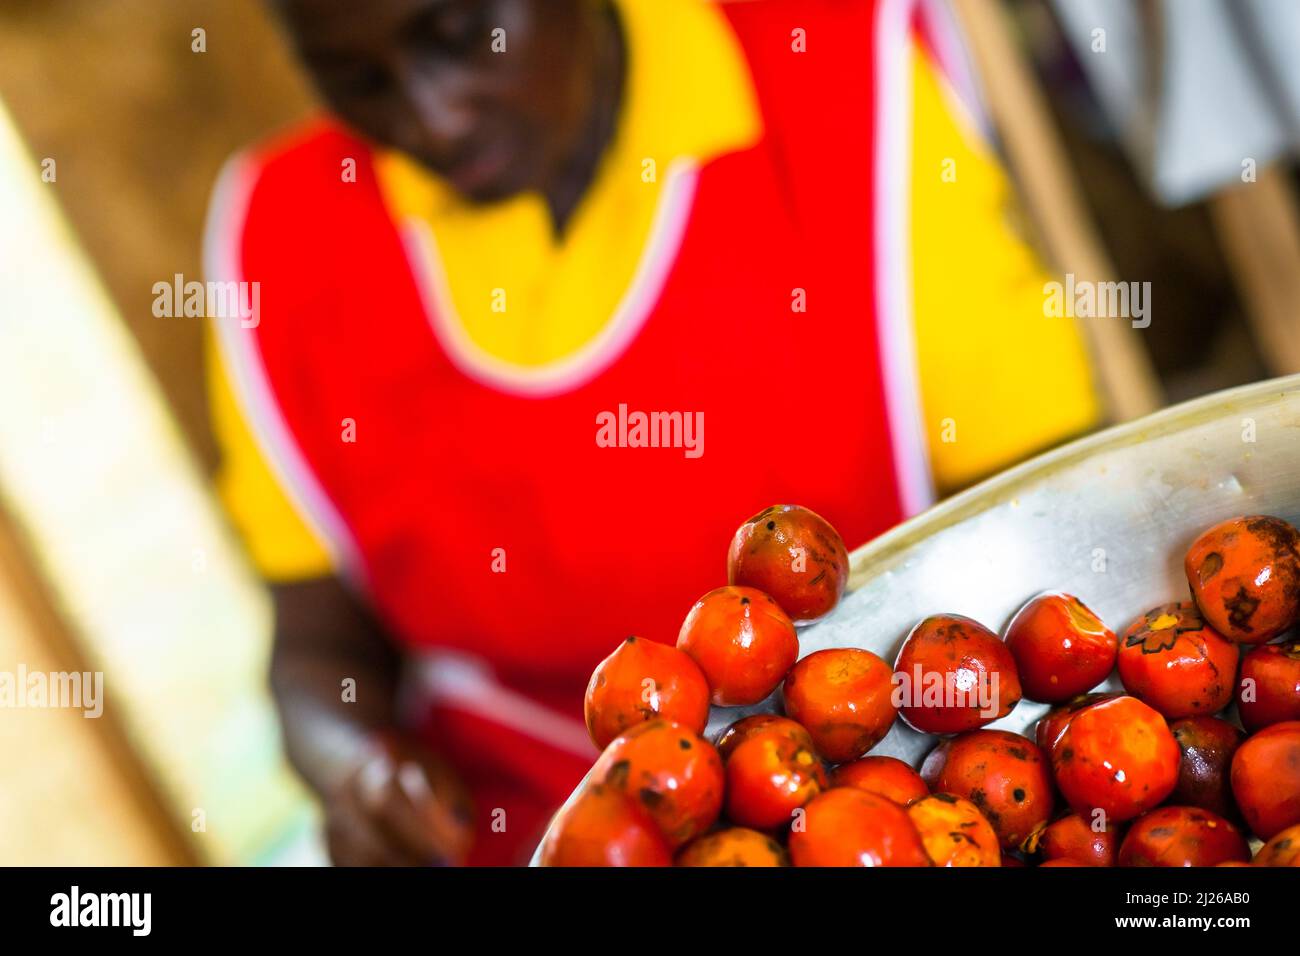 Freshly cooked chontaduro (peach palm) fruits are seen offered for sale in a street market in Cali, Valle del Cauca, Colombia. Stock Photo